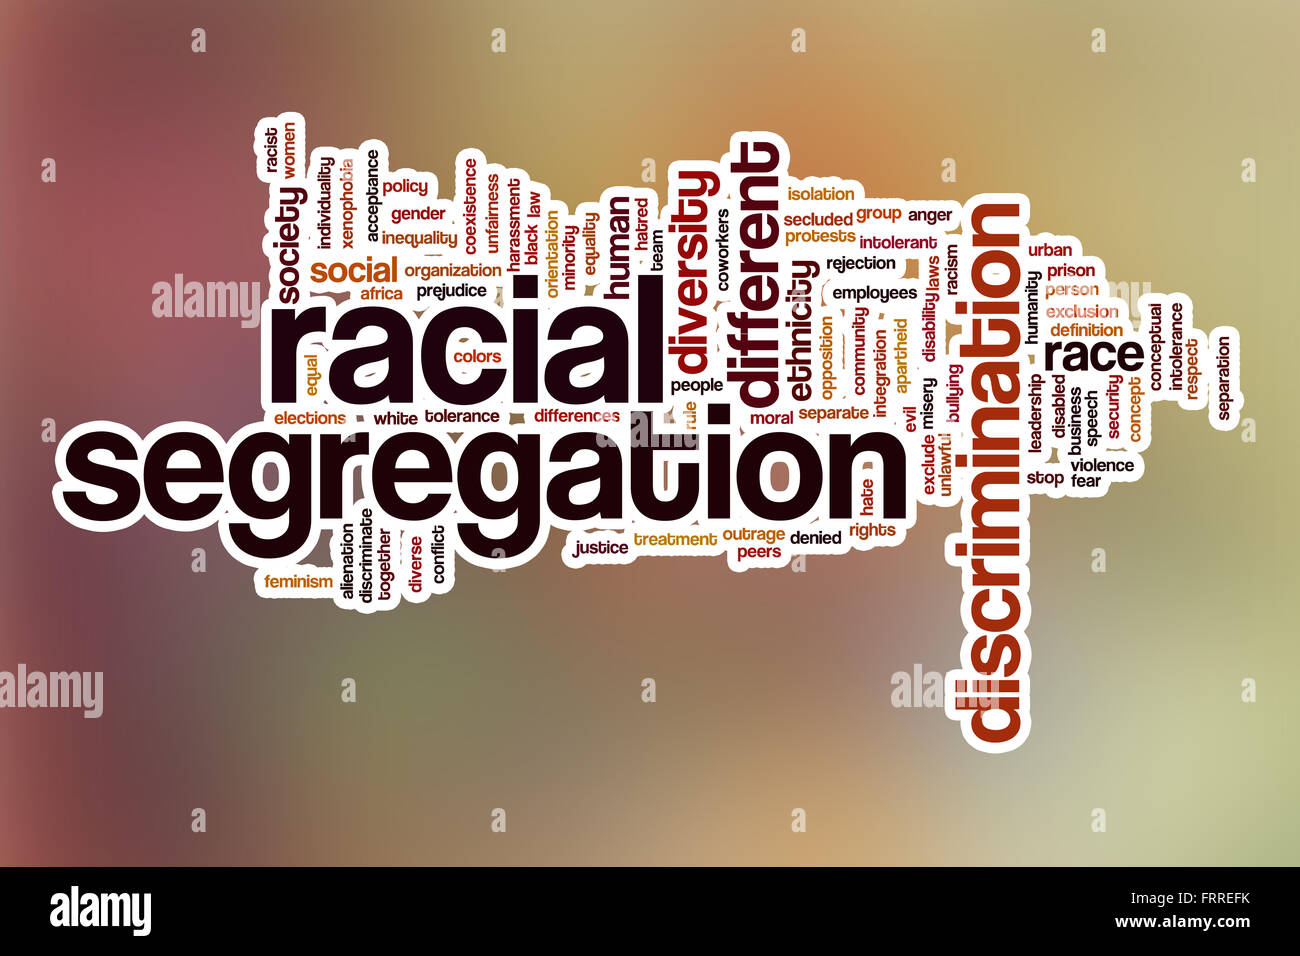 Racial segregation word cloud concept with abstract background Stock Photo